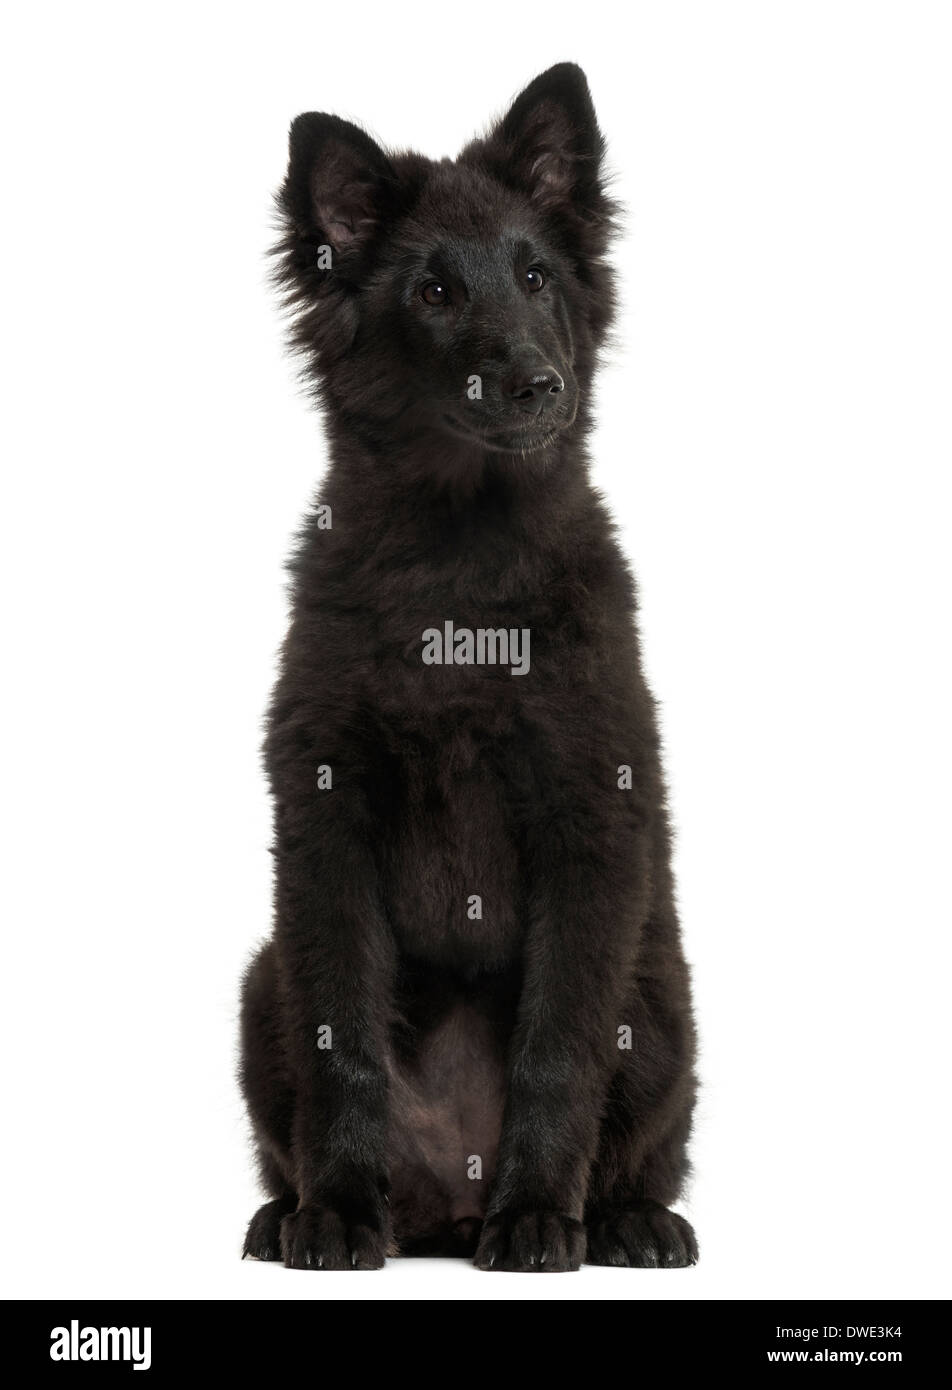 Greenland Dog puppy sitting, looking away, 4 months old, against white background Stock Photo